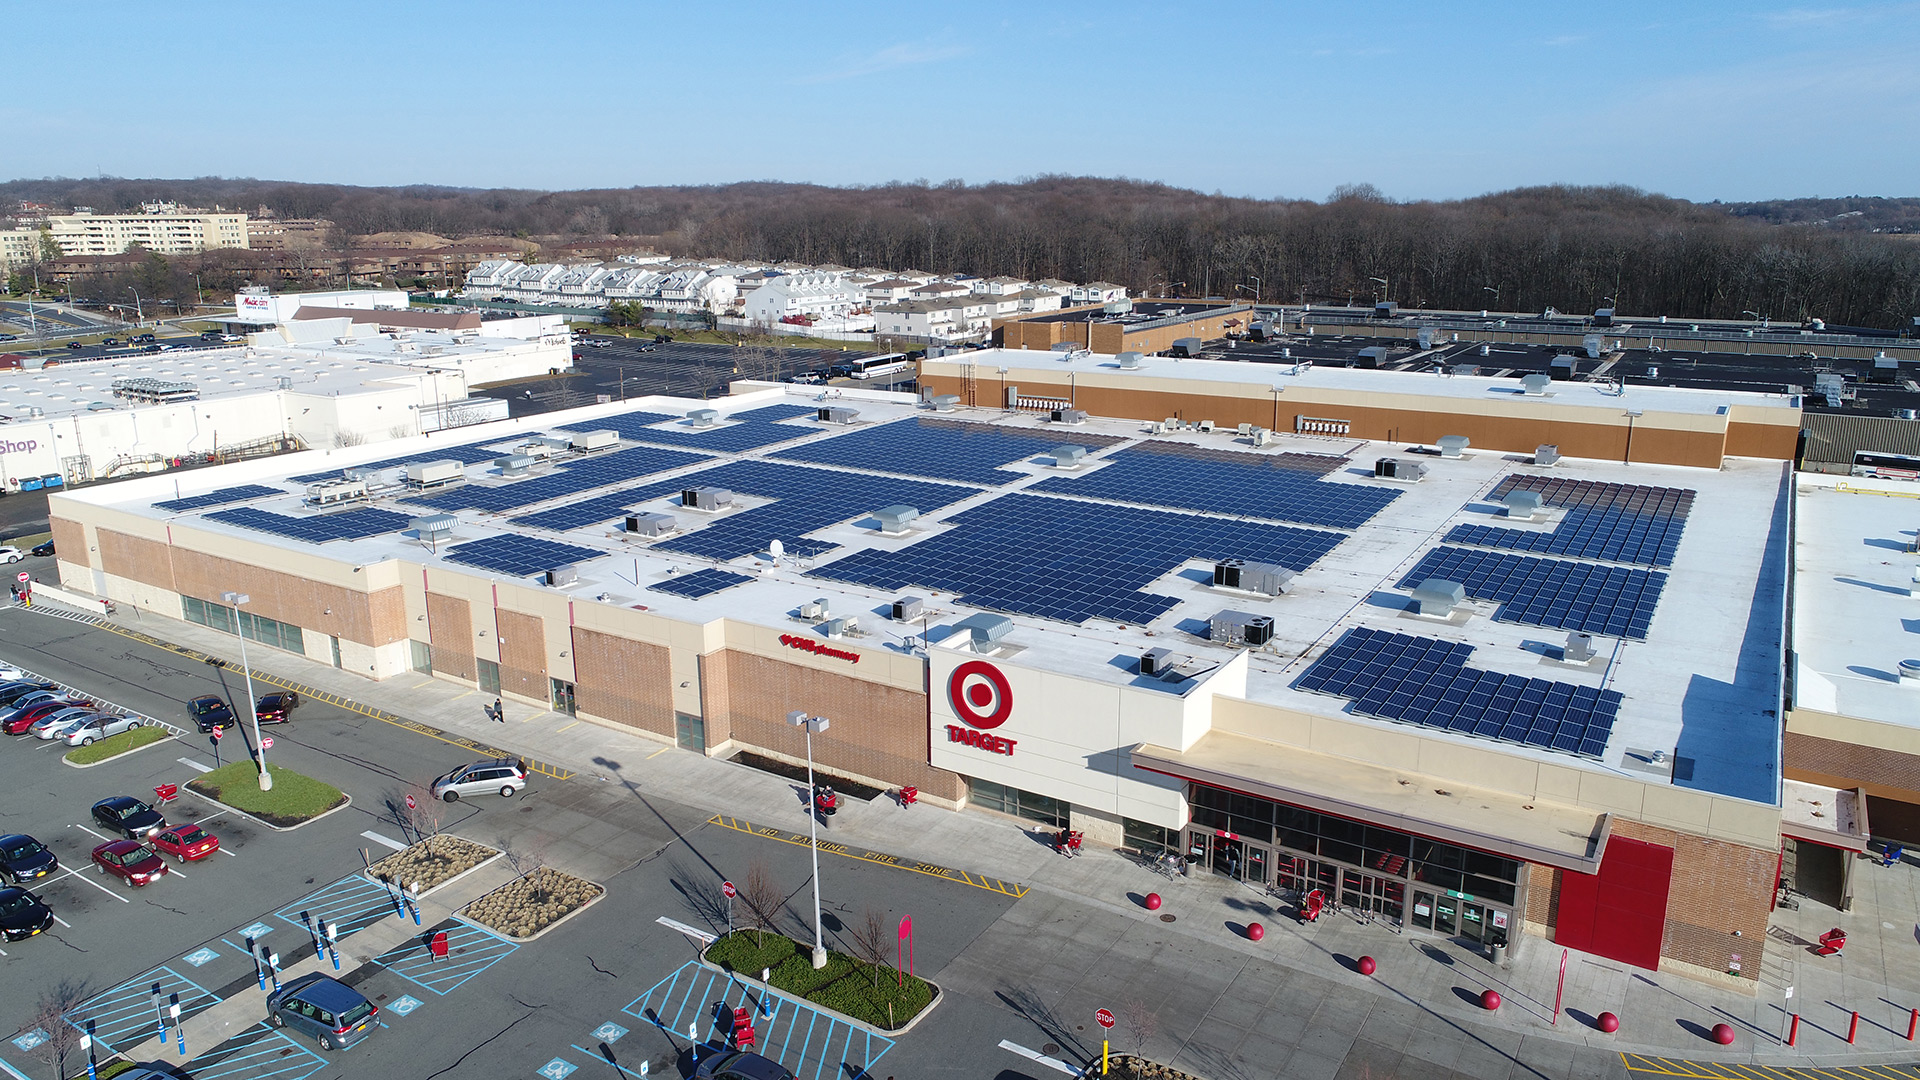 Target added more than 40 megawatts of solar in 2017, earning the company the No.1 spot in SEIA's Solar Means Business report